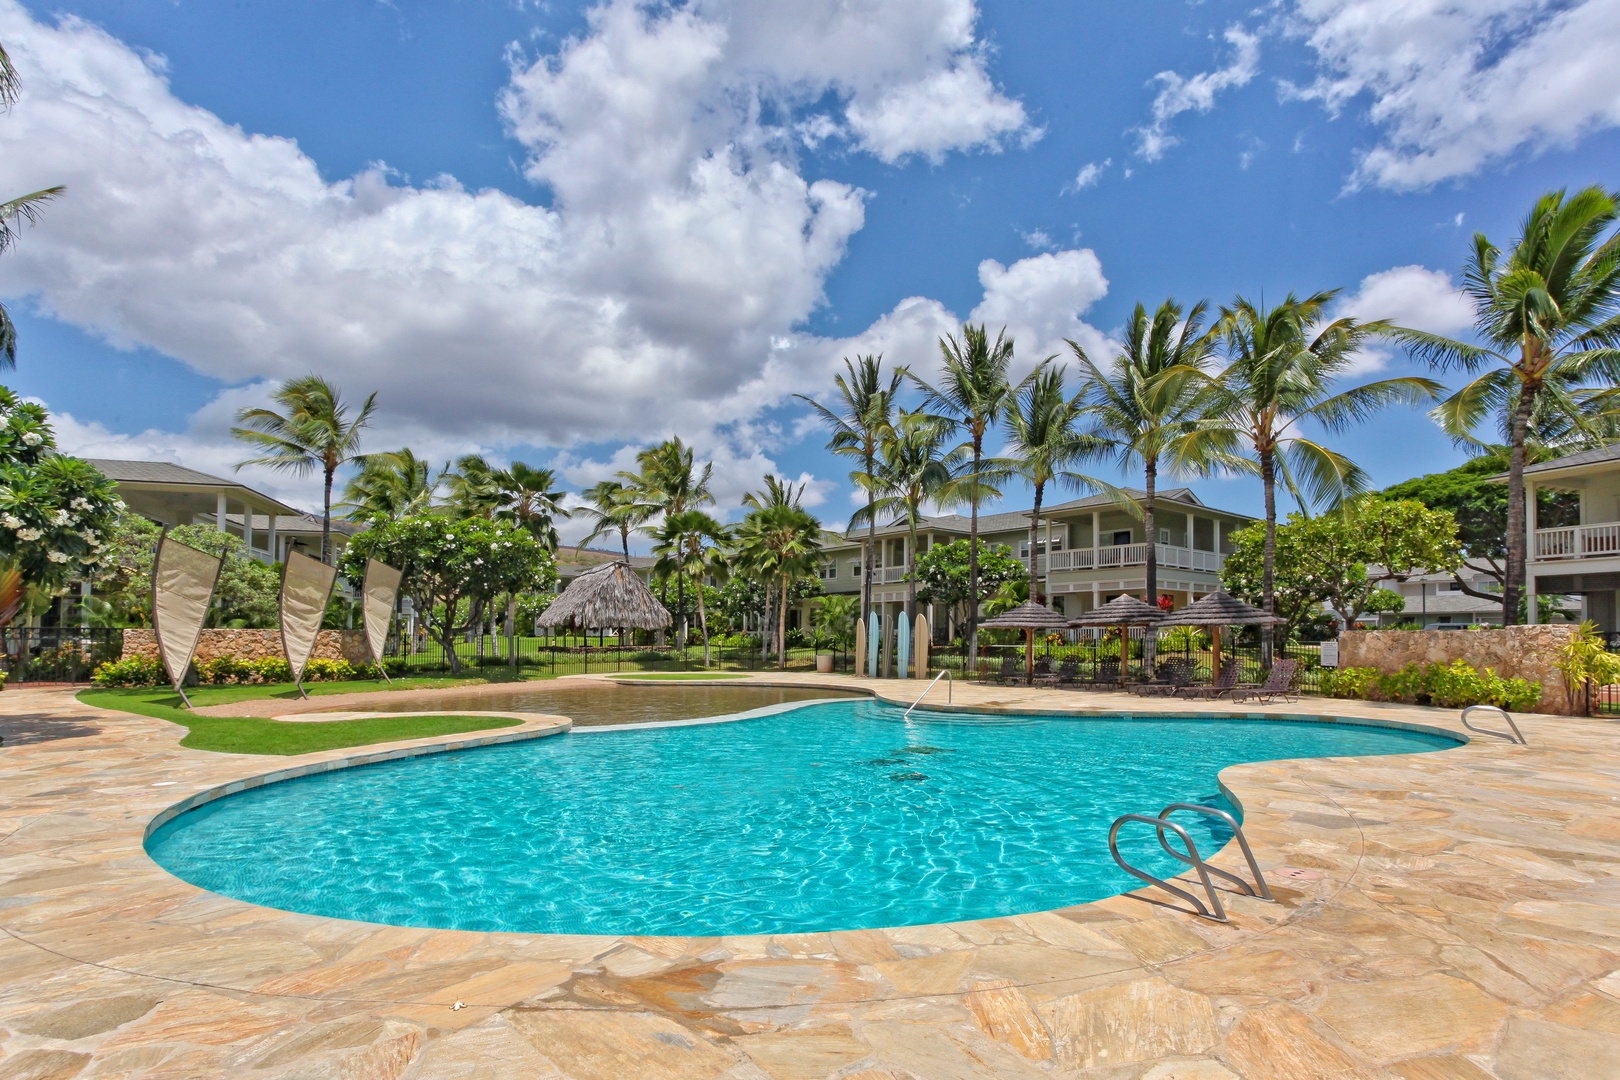 Kapolei Vacation Rentals, Coconut Plantation 1208-2 - Relax with your favorite book at the Coconut Plantation pool.